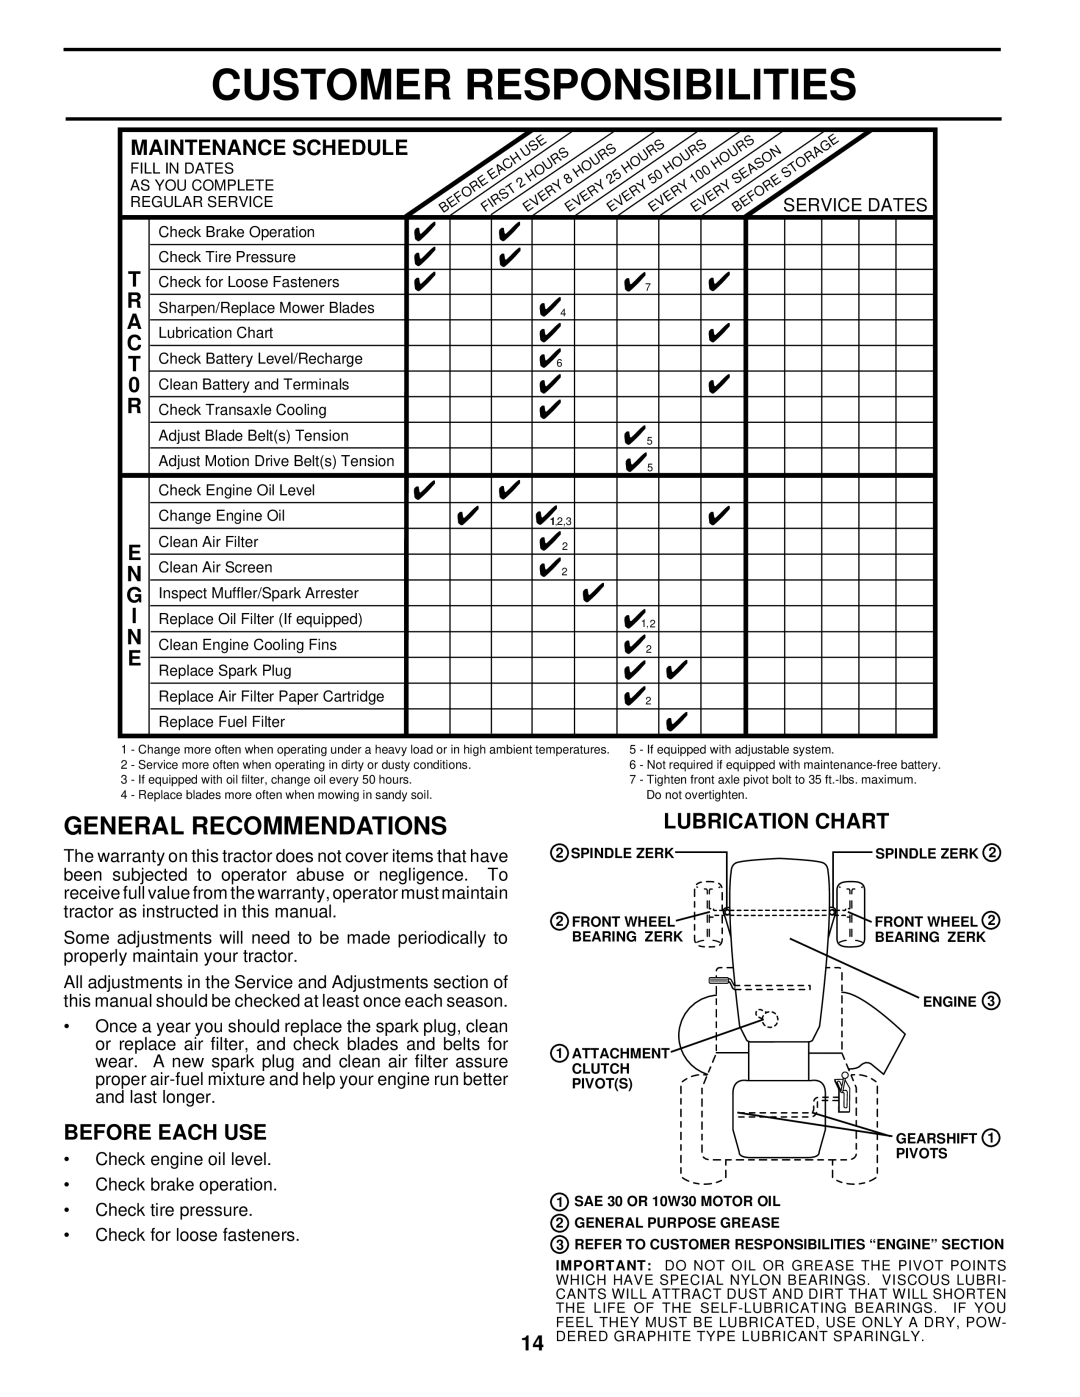 Husqvarna LT120 owner manual Customer Responsibilities, General Recommendations, Before Each Use, Lubrication Chart 